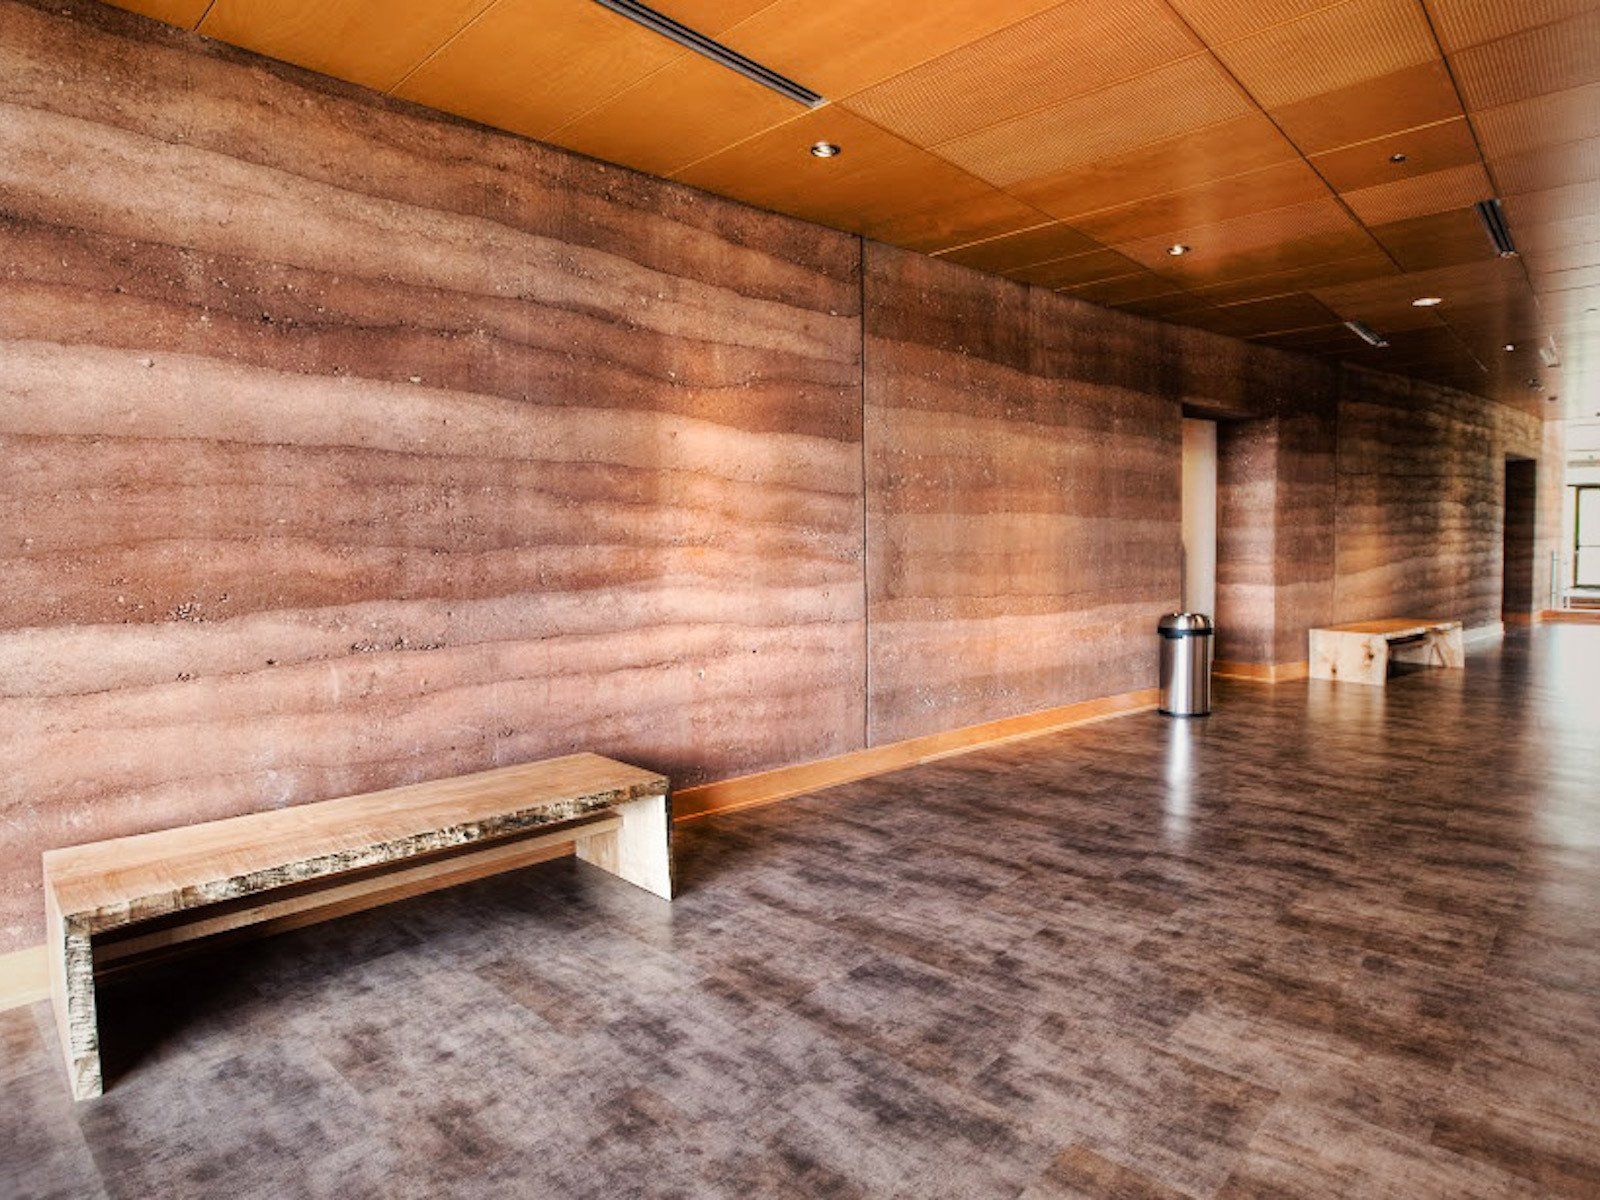 Brinton Museum interior rammed earth wall and floor with seating areas for visitors and a metal trash can